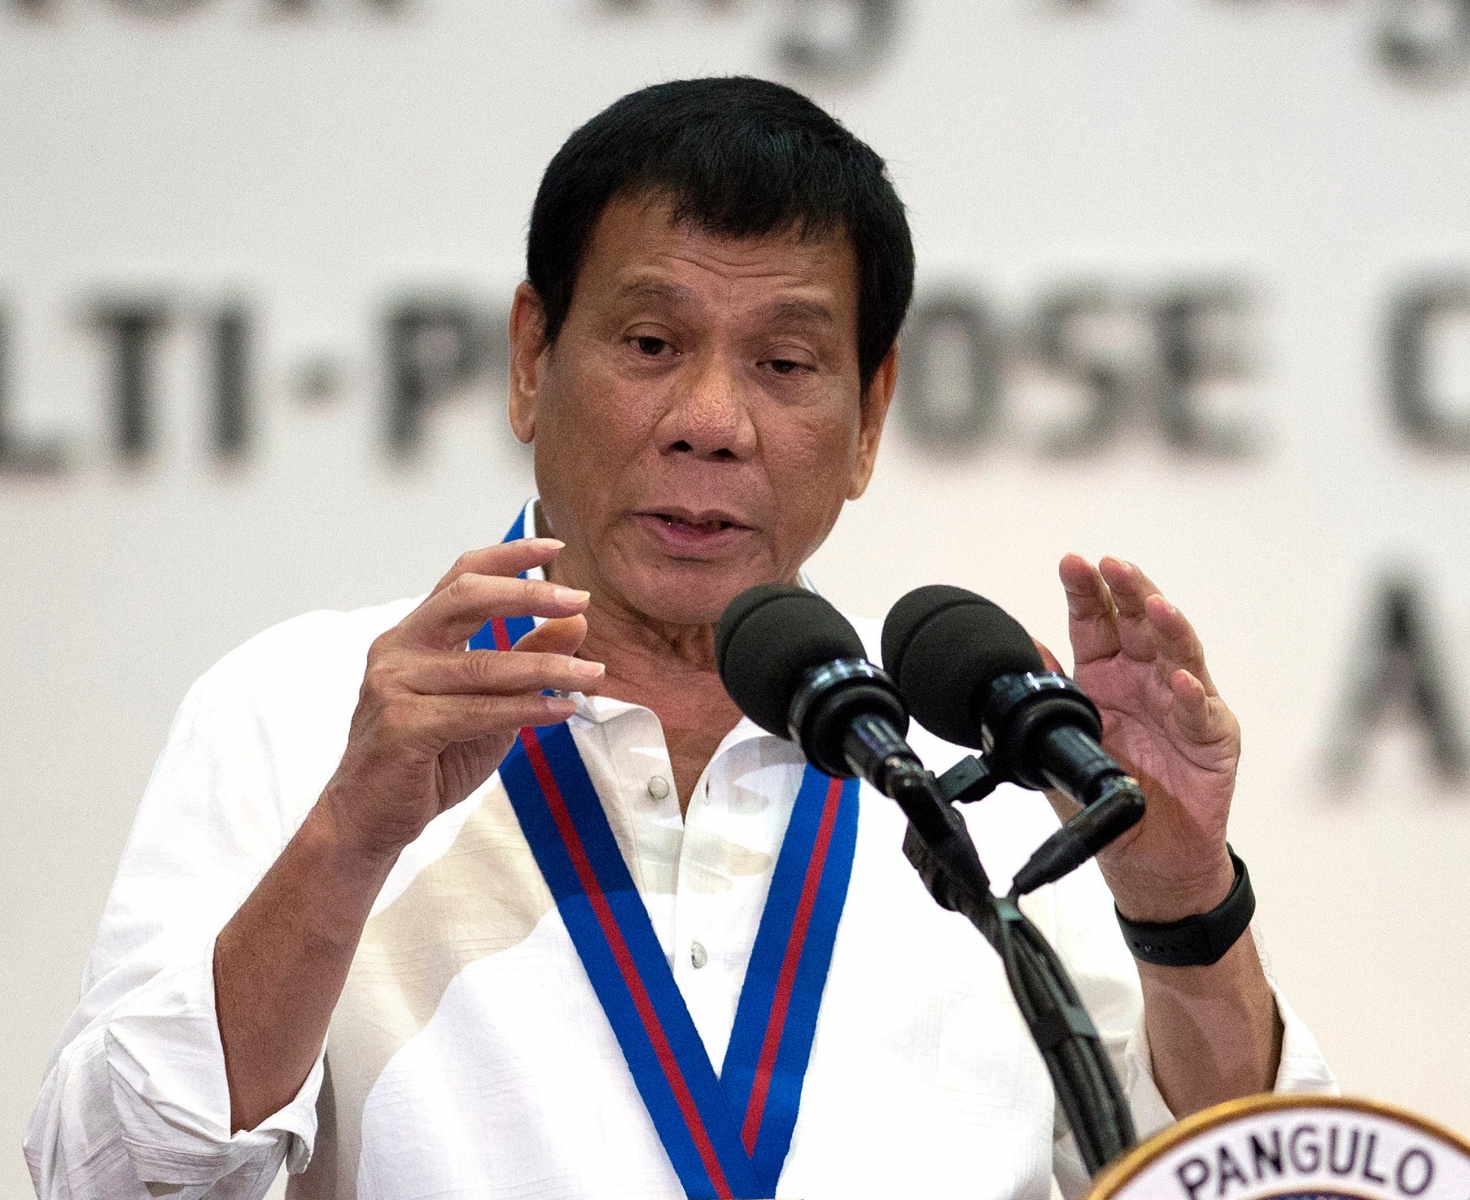 FILE - In this Wednesday, Aug. 17, 2016 file photo, Philippine President Rodrigo Duterte gestures as he talks during the 115th Police Service Anniversary at the Philippine National Police headquarters in Manila. The Philippines' brash-talking president has threatened to withdraw his country from the United Nations in his latest outburst against critics of his anti-drugs campaign that has left hundreds of suspects dead. Duterte ridiculed the U.N. as inutile, and lashed at U.S. police killings of black men. (Noel Celis/Pool Photo via AP, File) Philippines Duterte